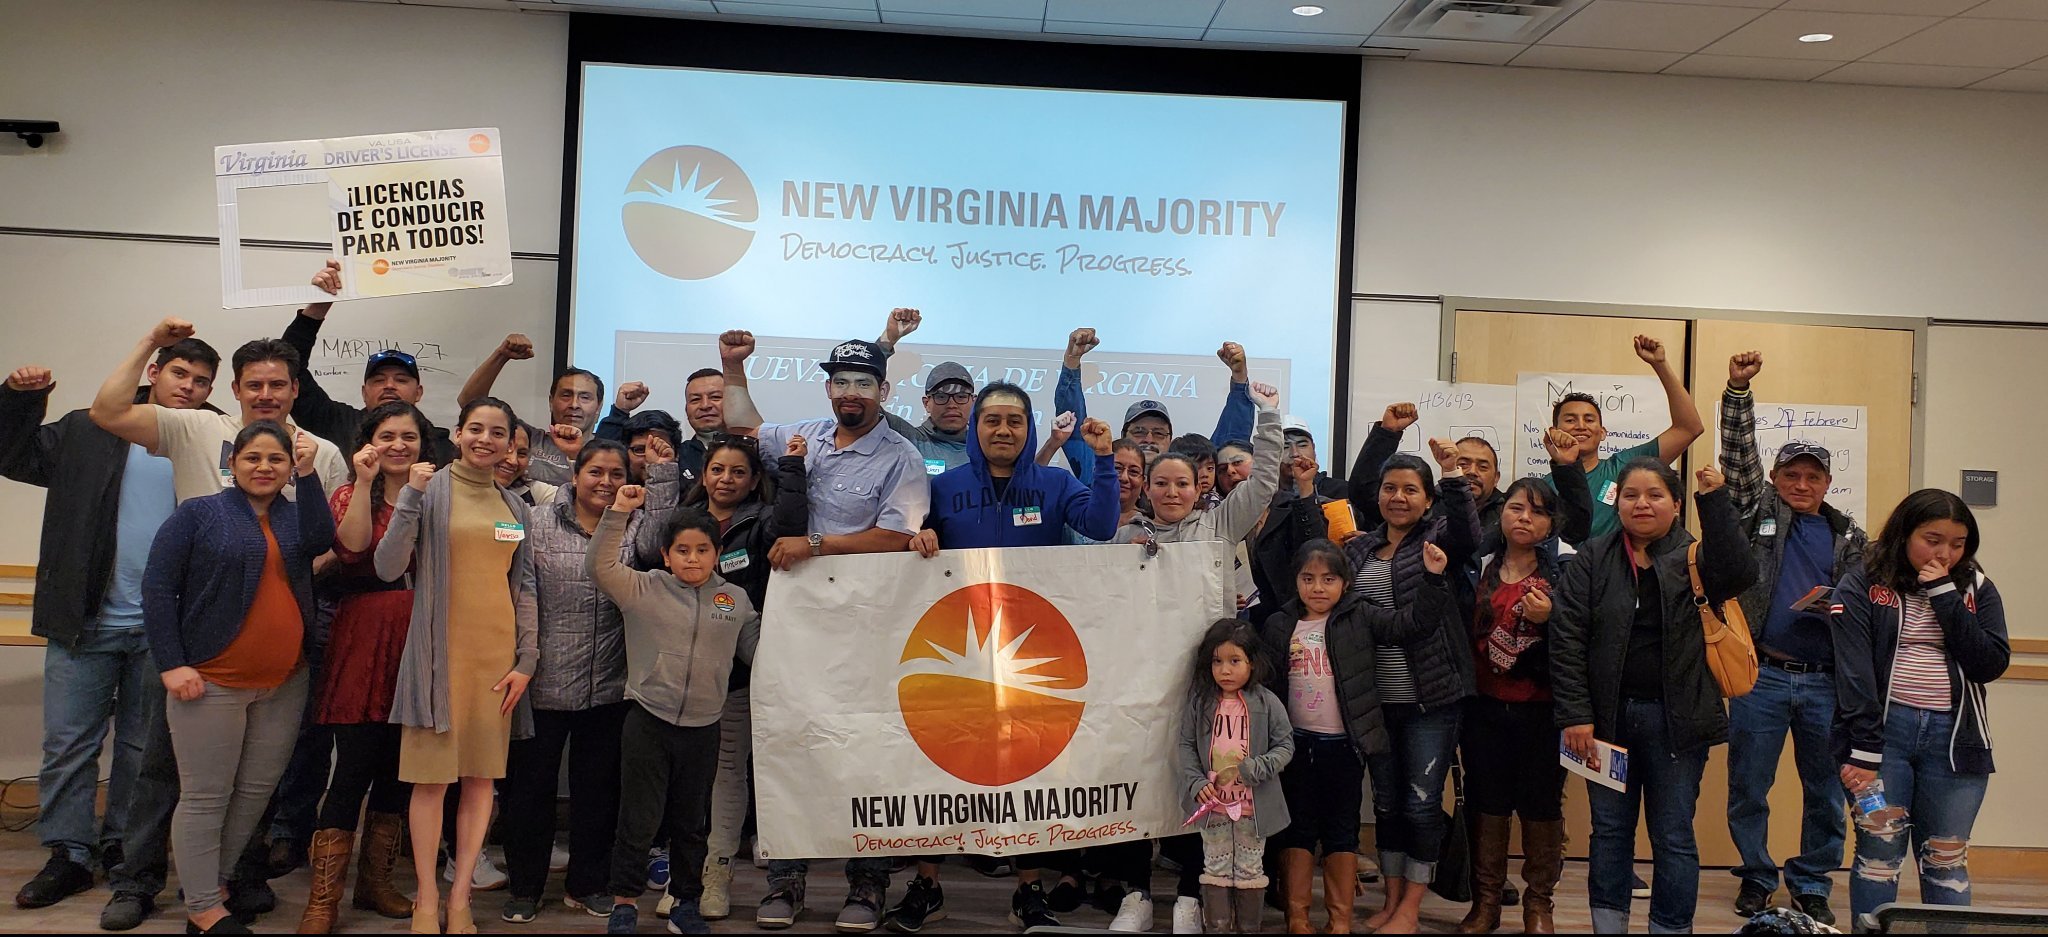 NVM organizers and community